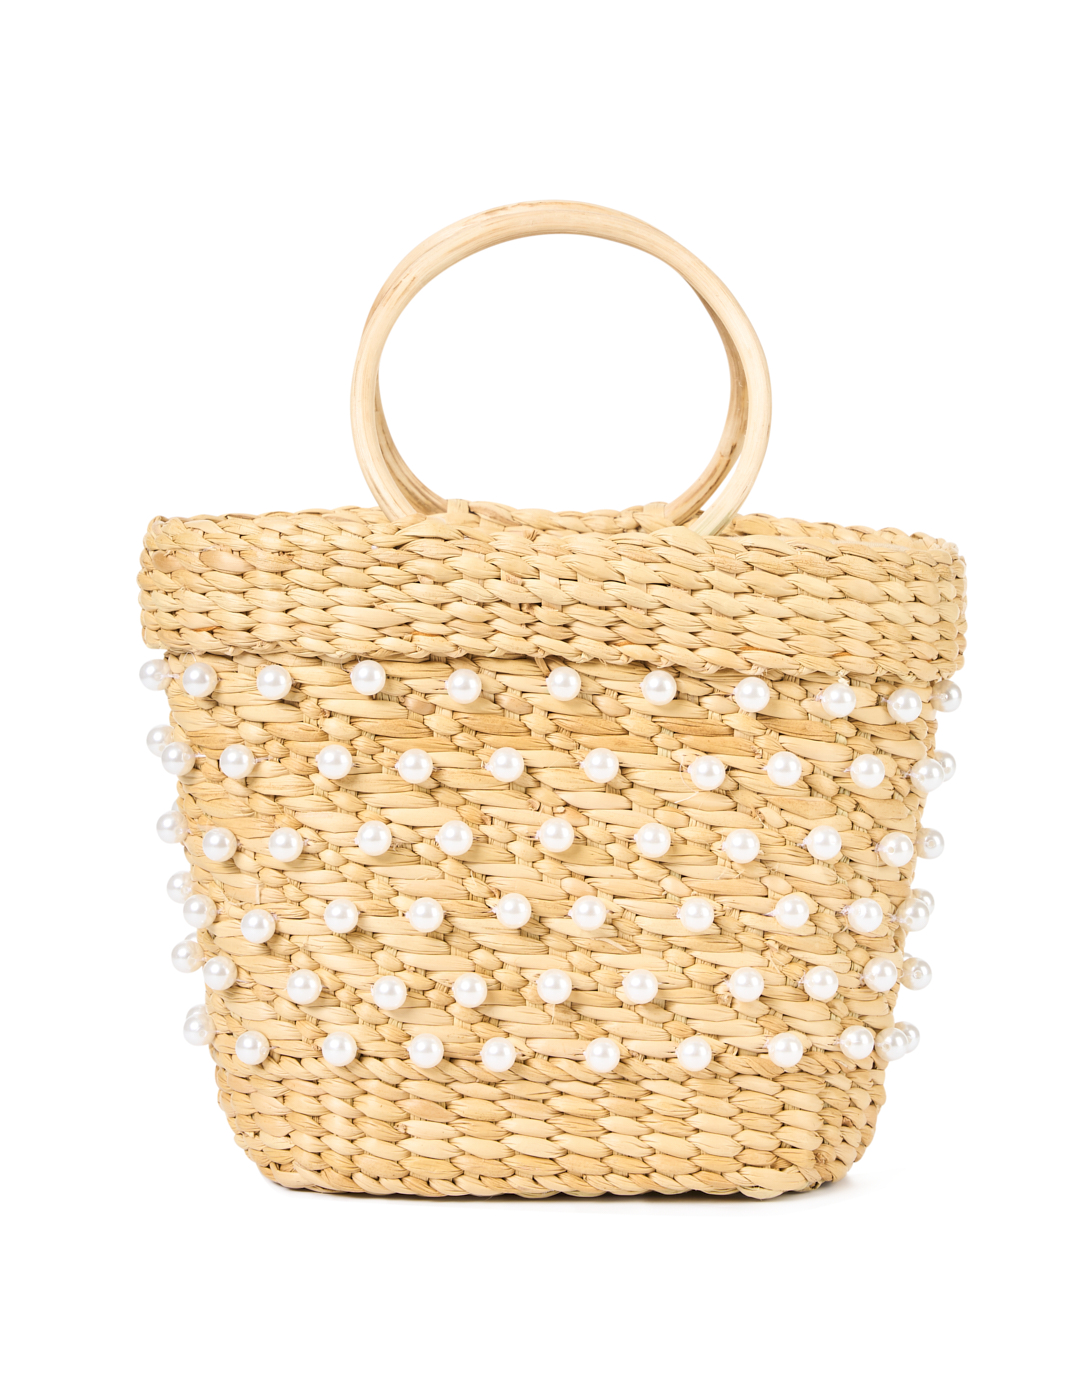 WICKER BAGS FOR SPRING AND SUMMER